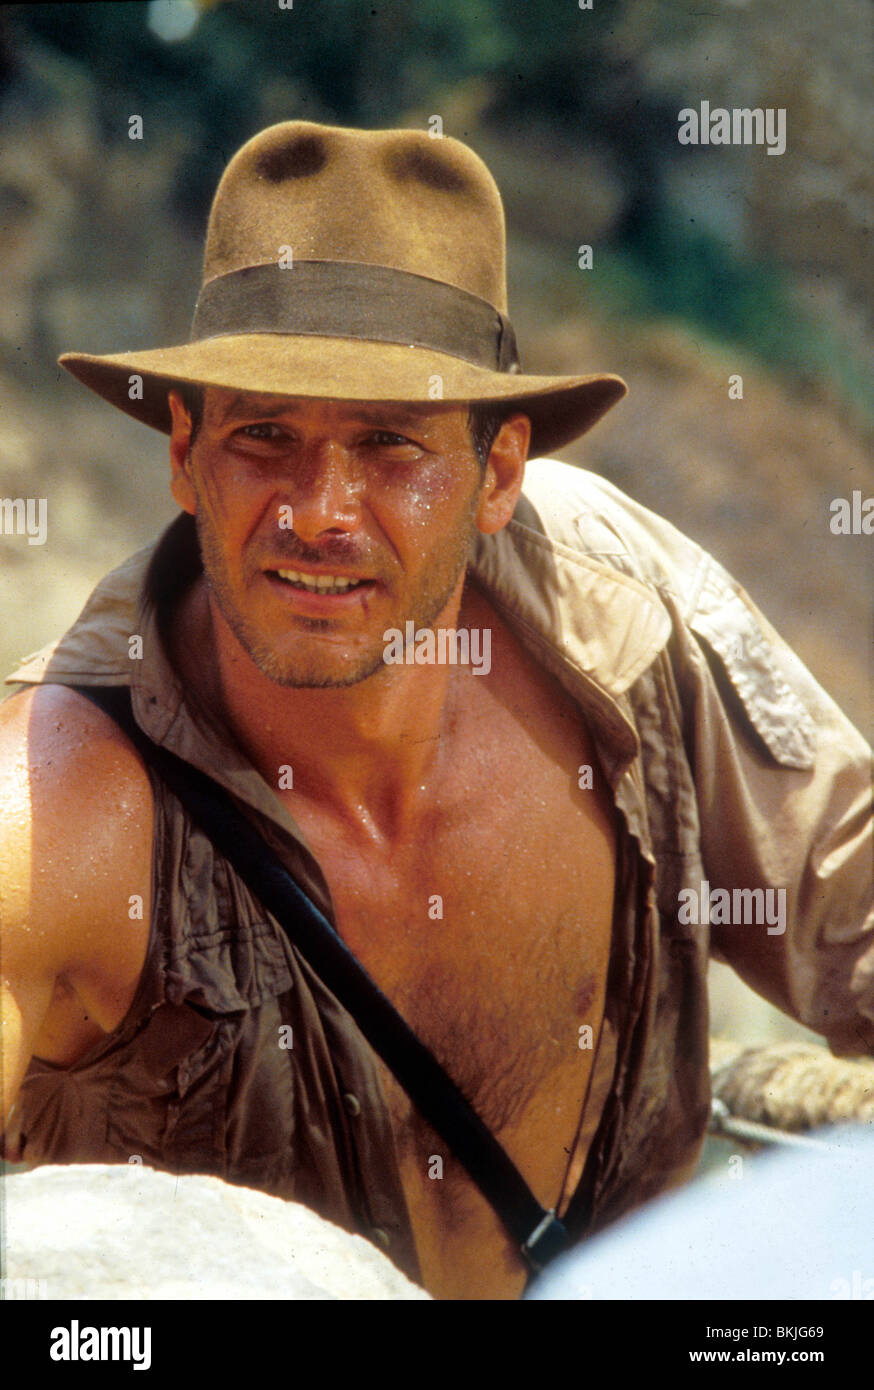 INDIANA JONES AND THE TEMPLE OF DOOM (1984) HARRISON FORD INT 097 Stock Photo